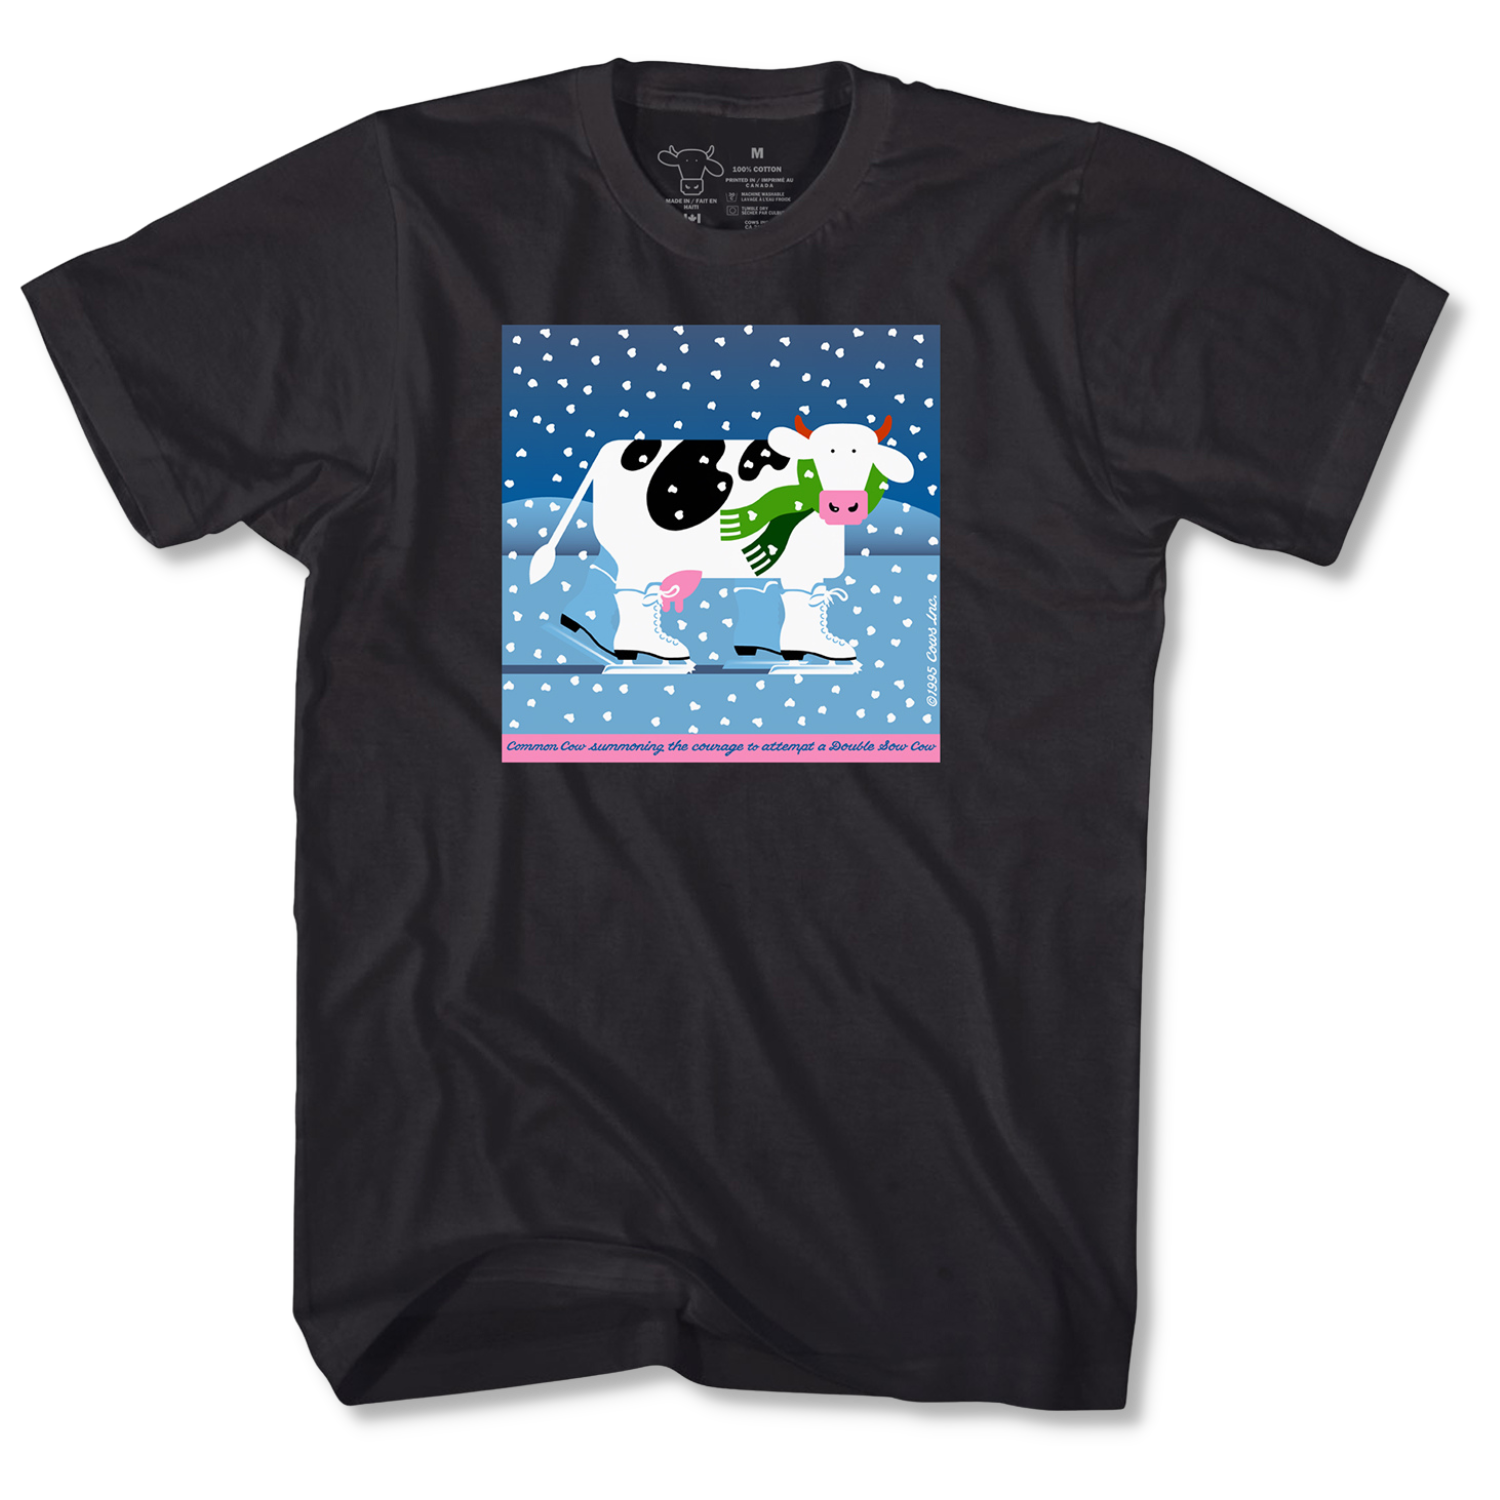 Patinage COWS Classic T